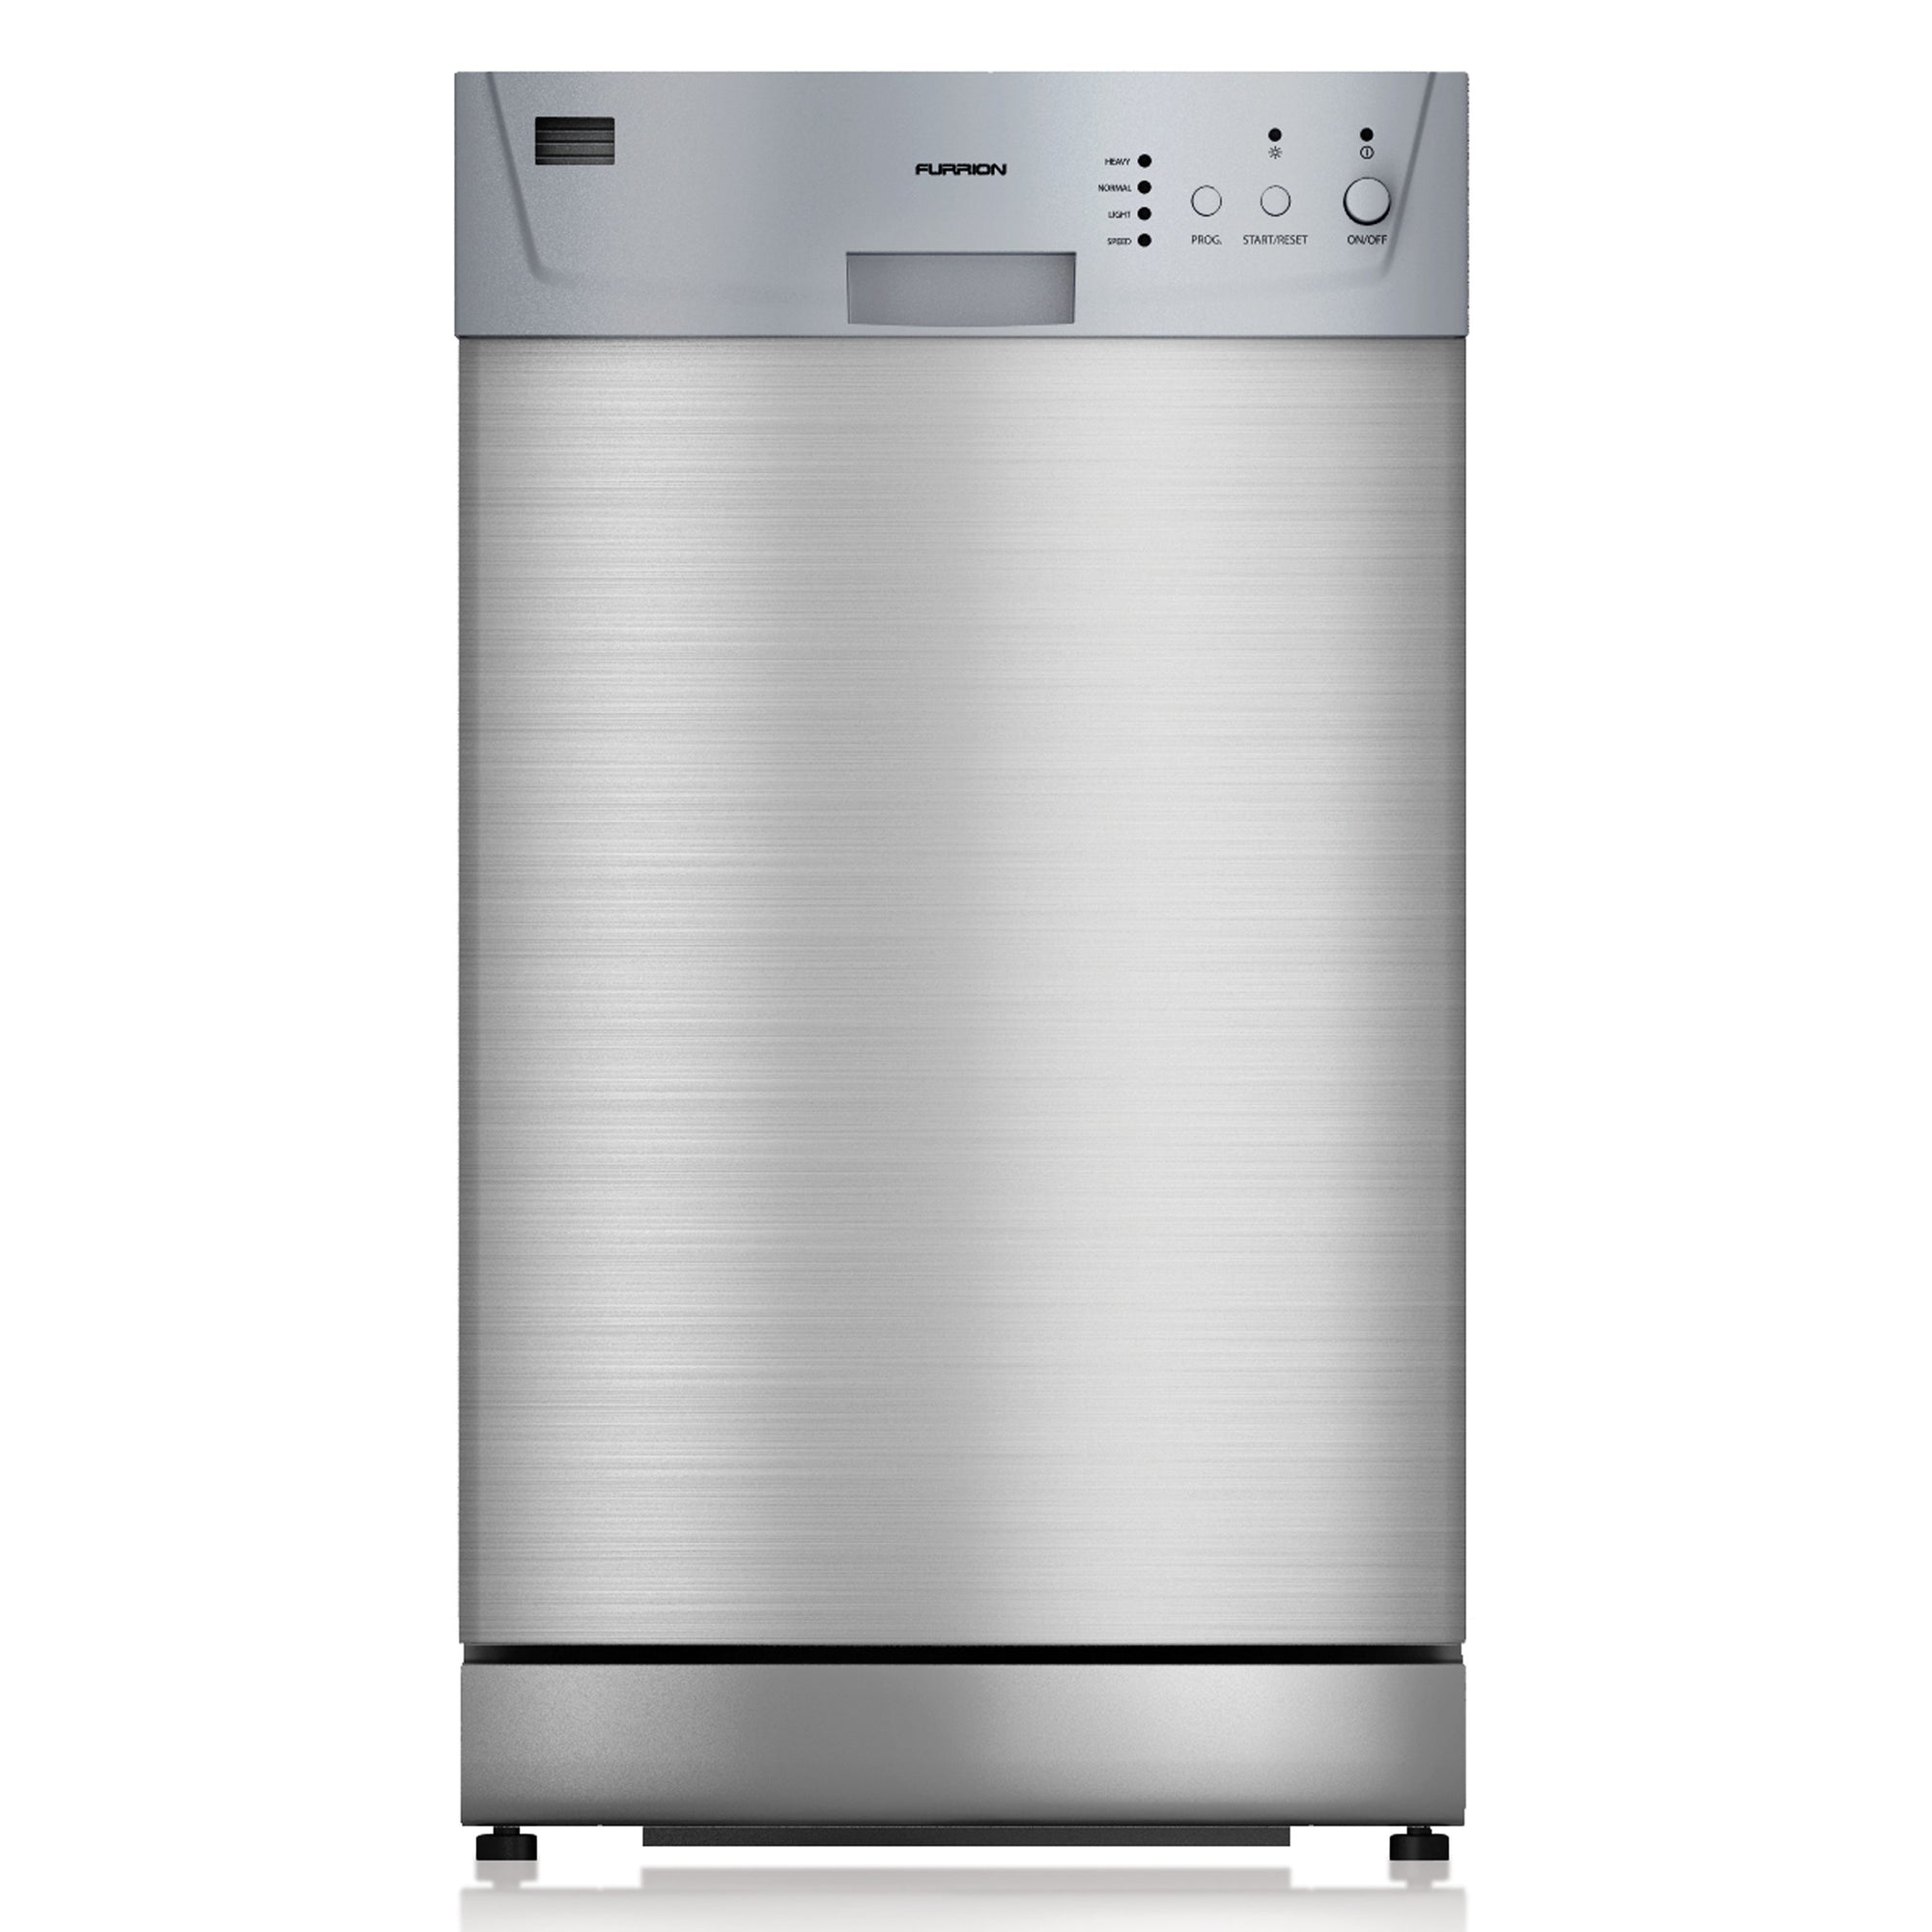 Furrion 381569 Stainless Steel Countertop Dishwasher - Tall